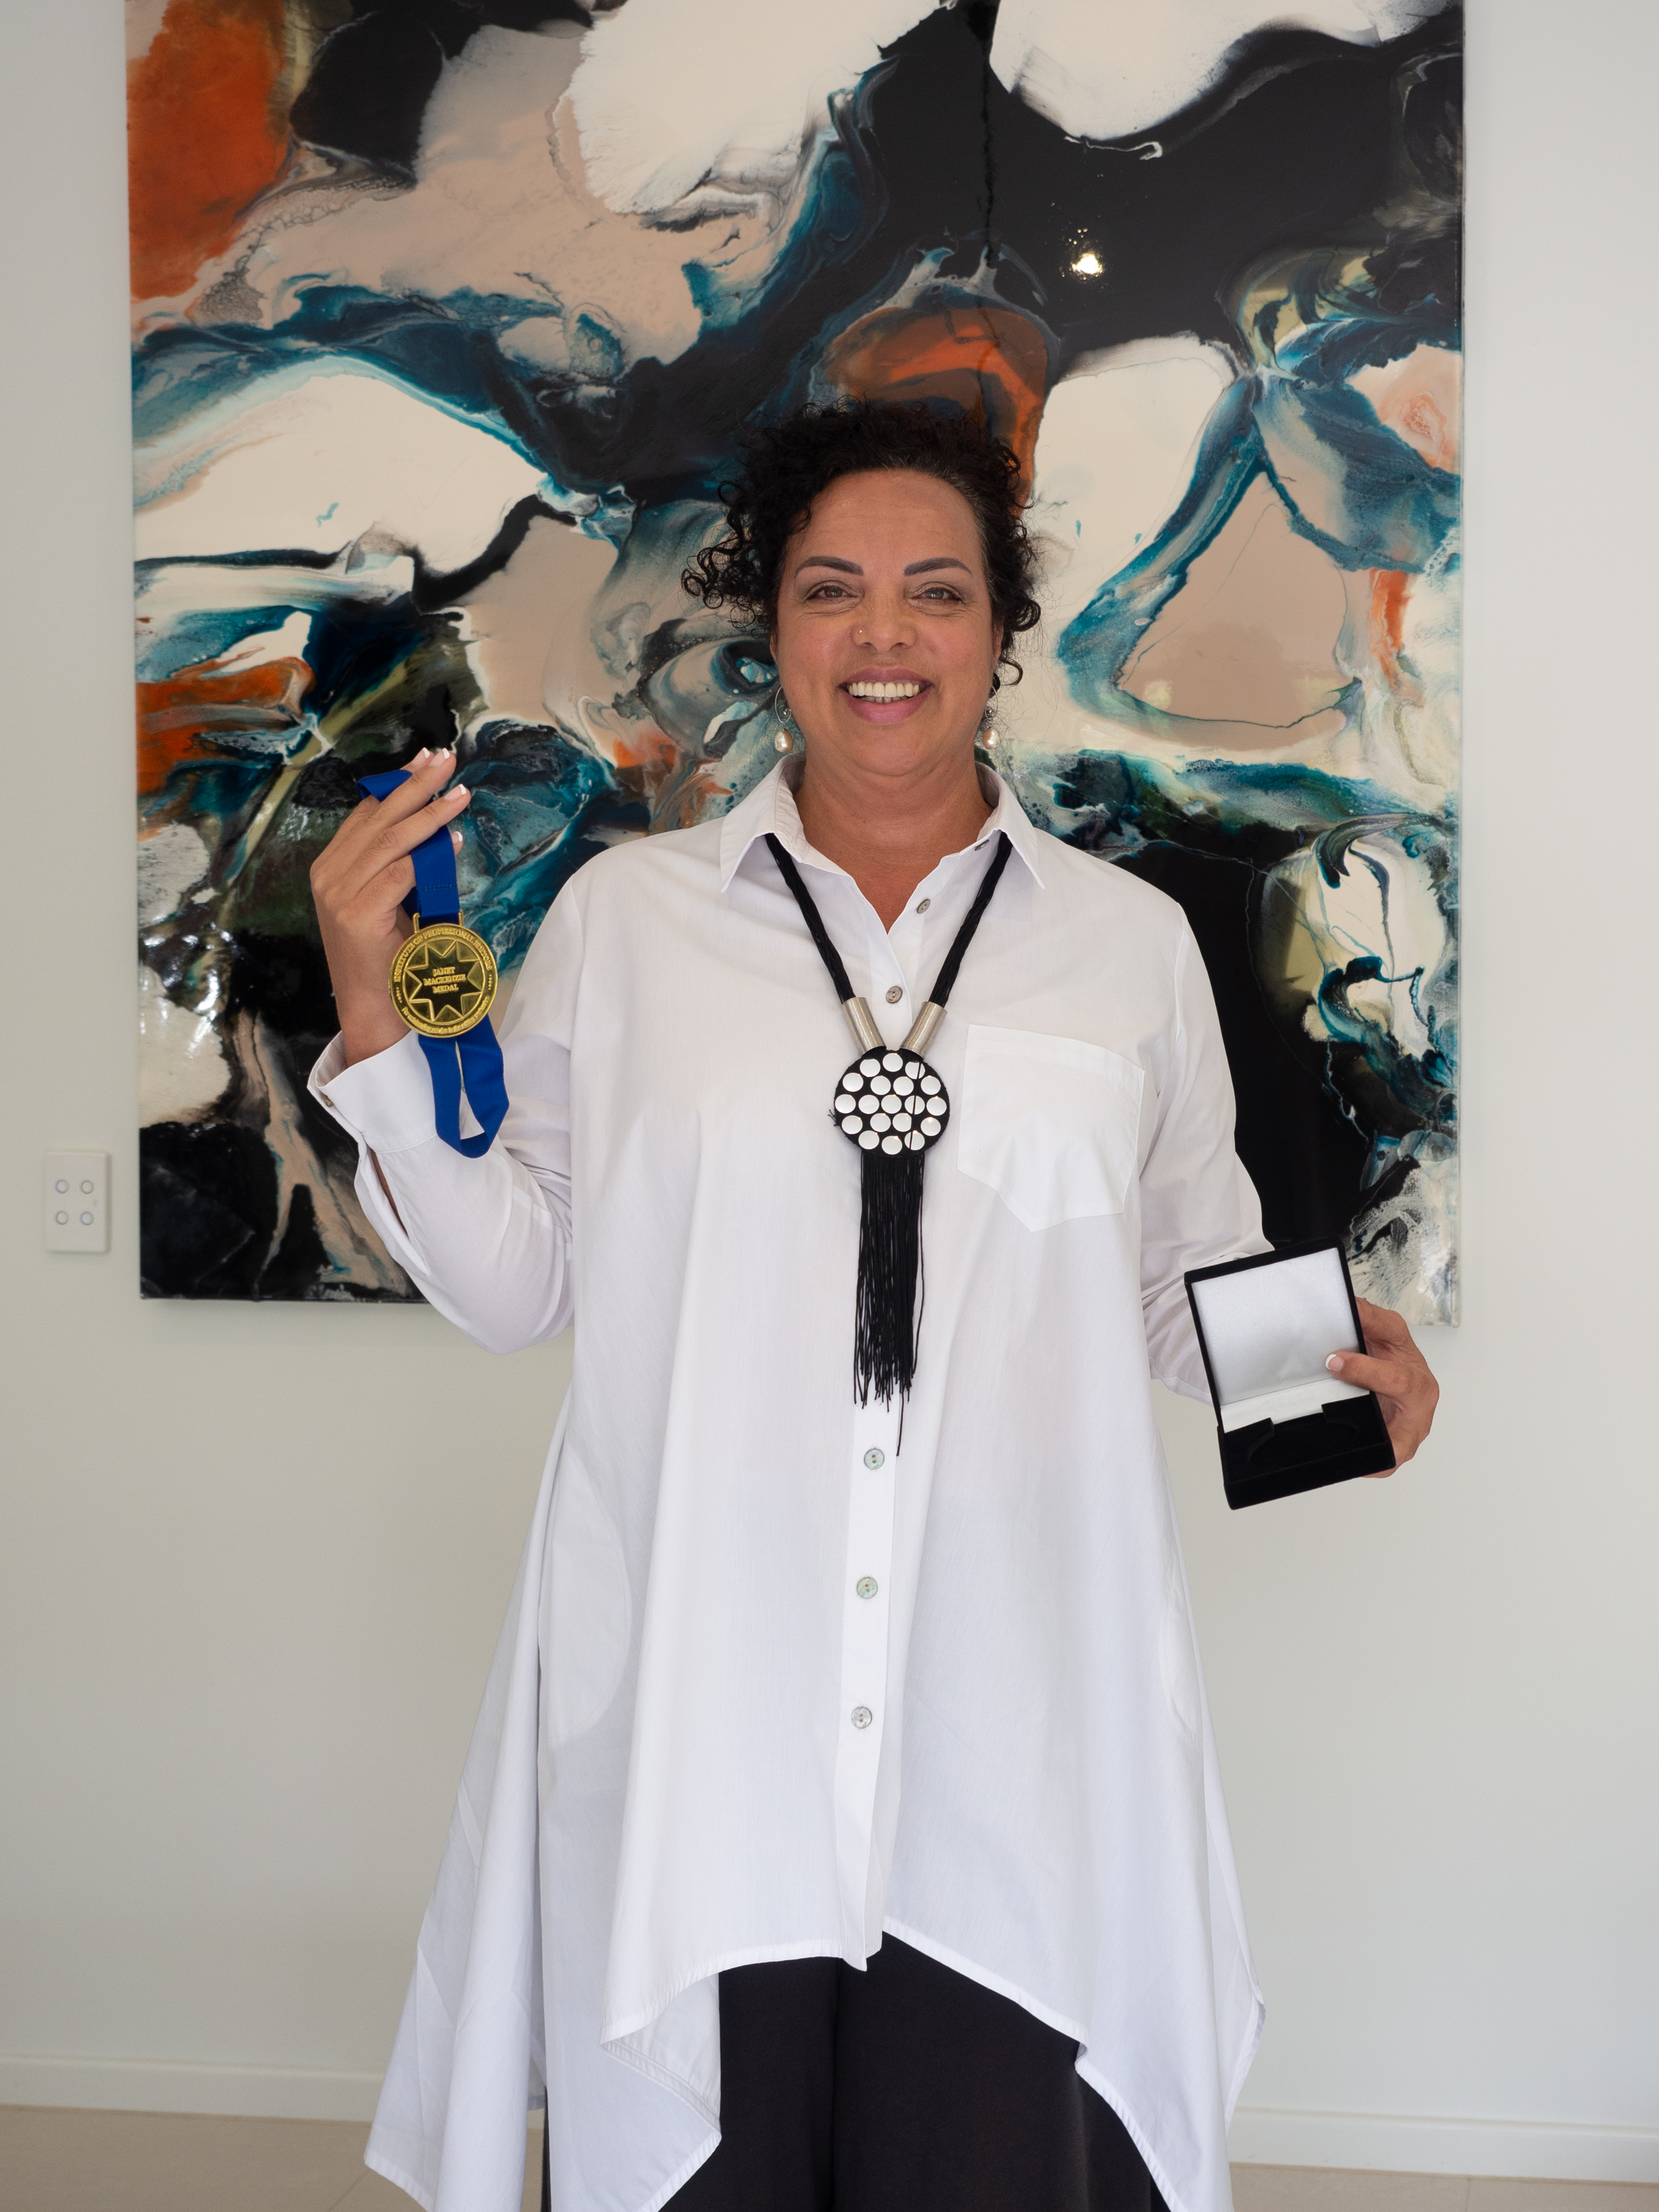 A photo of a smiling woman, Dr Renée Otmar, holding a large gold medal on a blue ribbon, in front of a bright abstract painting